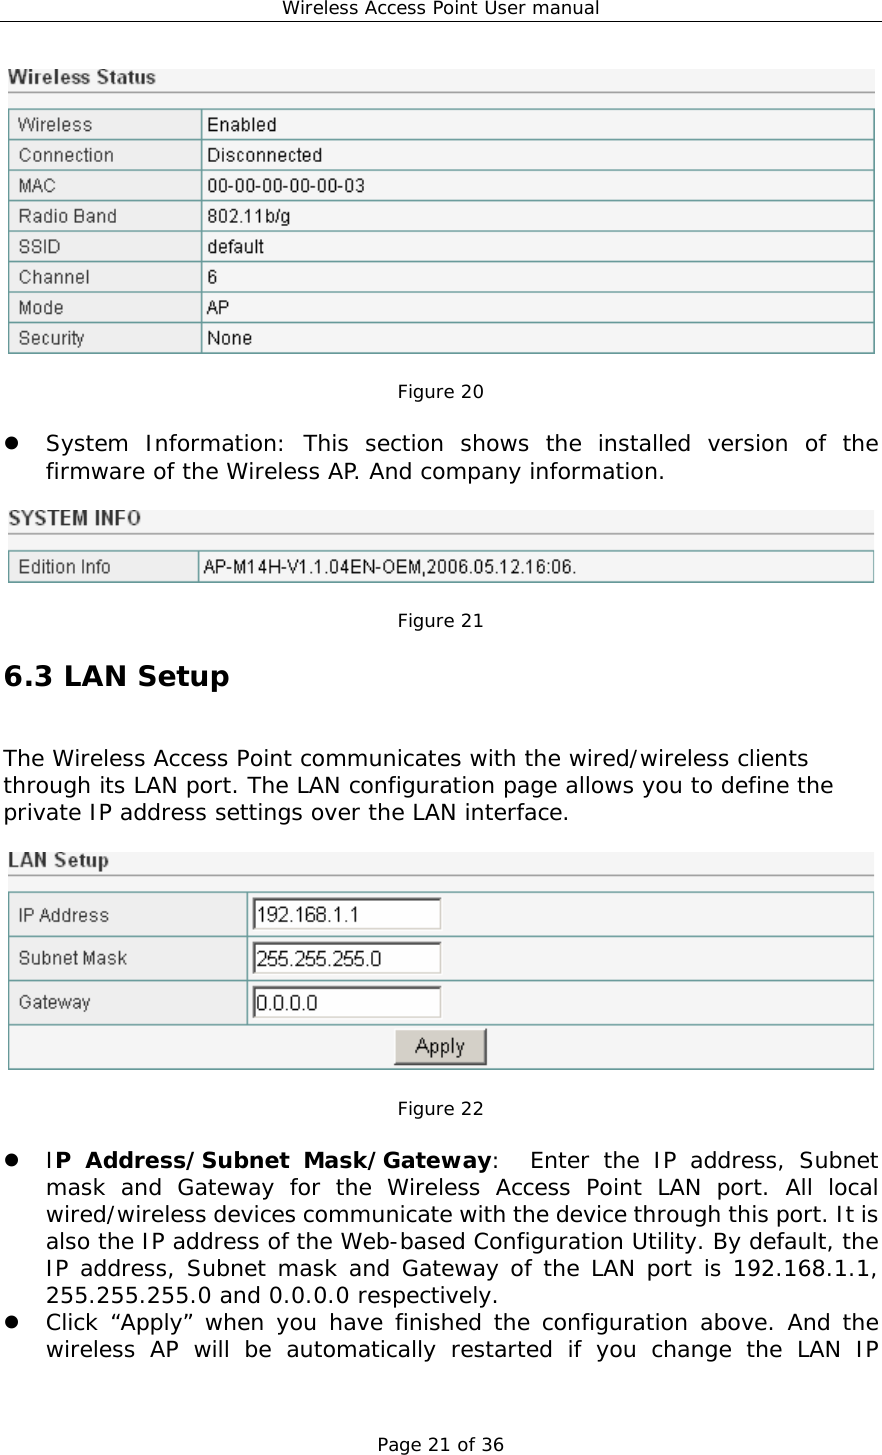 Wireless Access Point User manual Page 21 of 36   Figure 20  z System Information: This section shows the installed version of the firmware of the Wireless AP. And company information.    Figure 21 6.3 LAN Setup The Wireless Access Point communicates with the wired/wireless clients through its LAN port. The LAN configuration page allows you to define the private IP address settings over the LAN interface.    Figure 22  z IP Address/Subnet Mask/Gateway:  Enter the IP address, Subnet mask and Gateway for the Wireless Access Point LAN port. All local wired/wireless devices communicate with the device through this port. It is also the IP address of the Web-based Configuration Utility. By default, the IP address, Subnet mask and Gateway of the LAN port is 192.168.1.1, 255.255.255.0 and 0.0.0.0 respectively.  z Click “Apply” when you have finished the configuration above. And the wireless AP will be automatically restarted if you change the LAN IP 